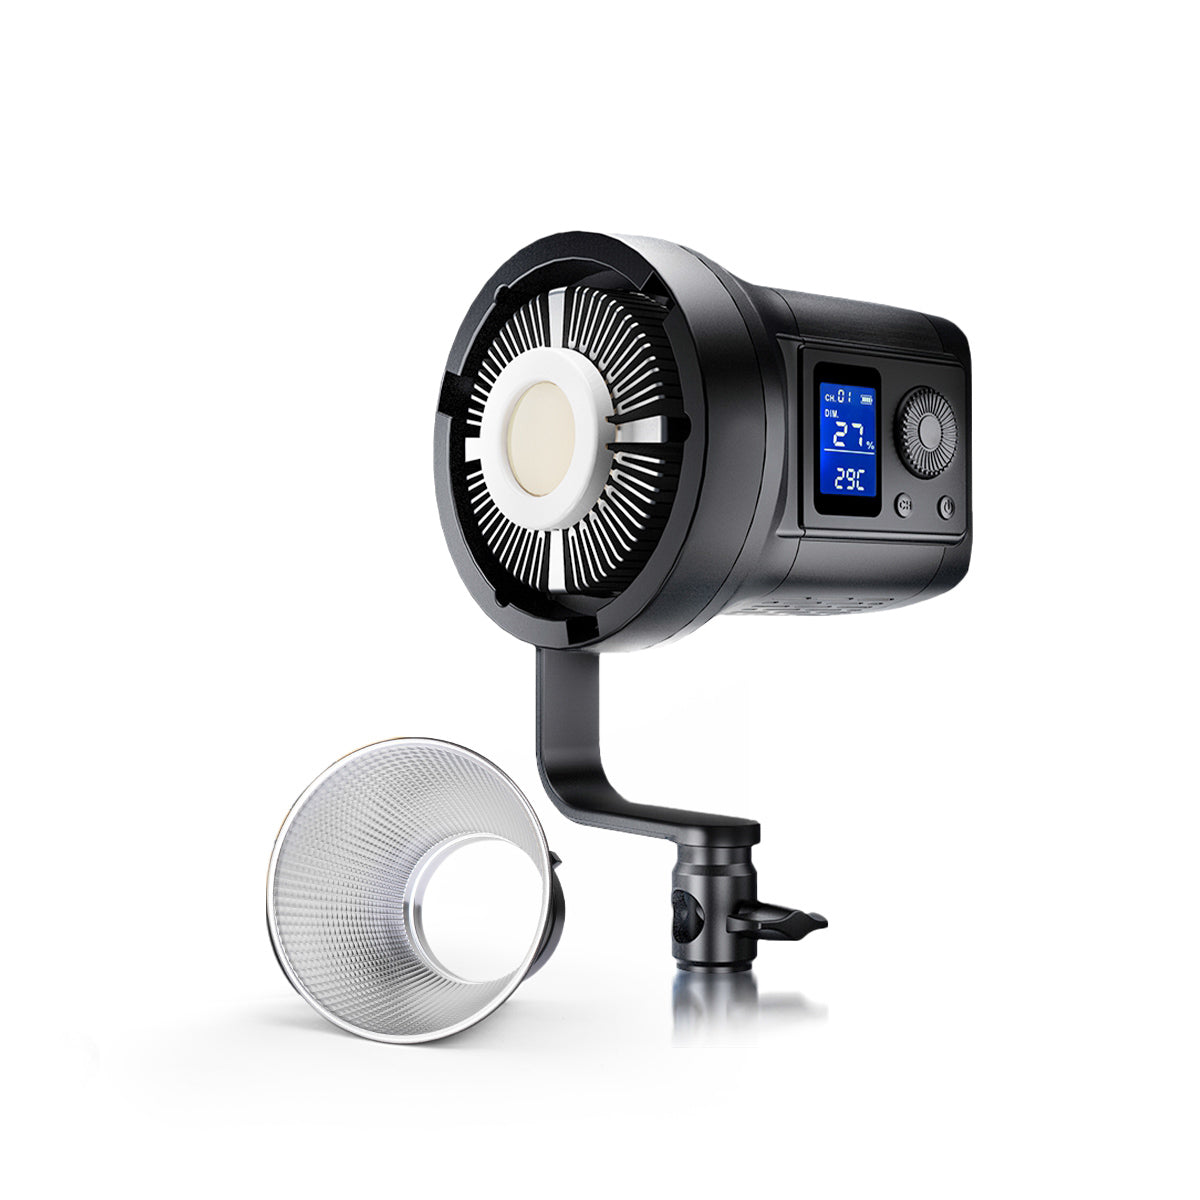 Digitek DCL-100W DC Combo Continuous AC/DC LED Light DCL-lOOW DC Combo with 18 CM Reflector